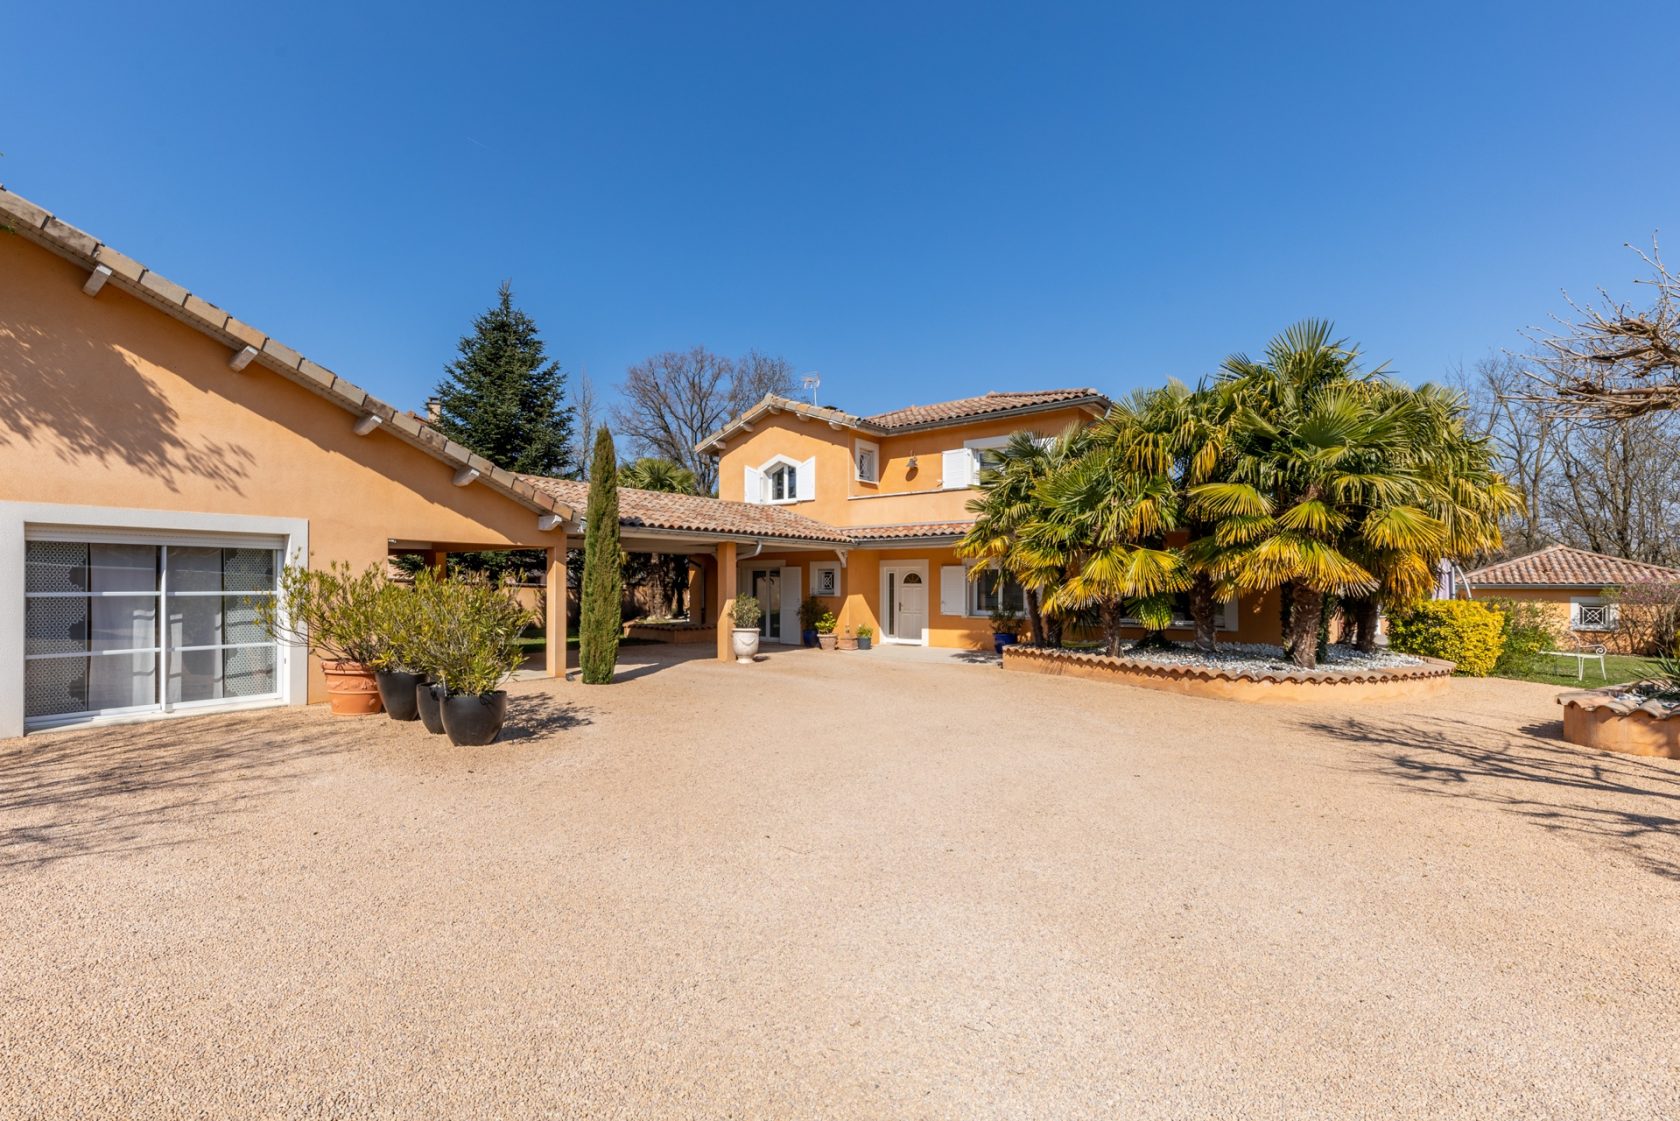 House on the banks of the Rhône with swimming pool